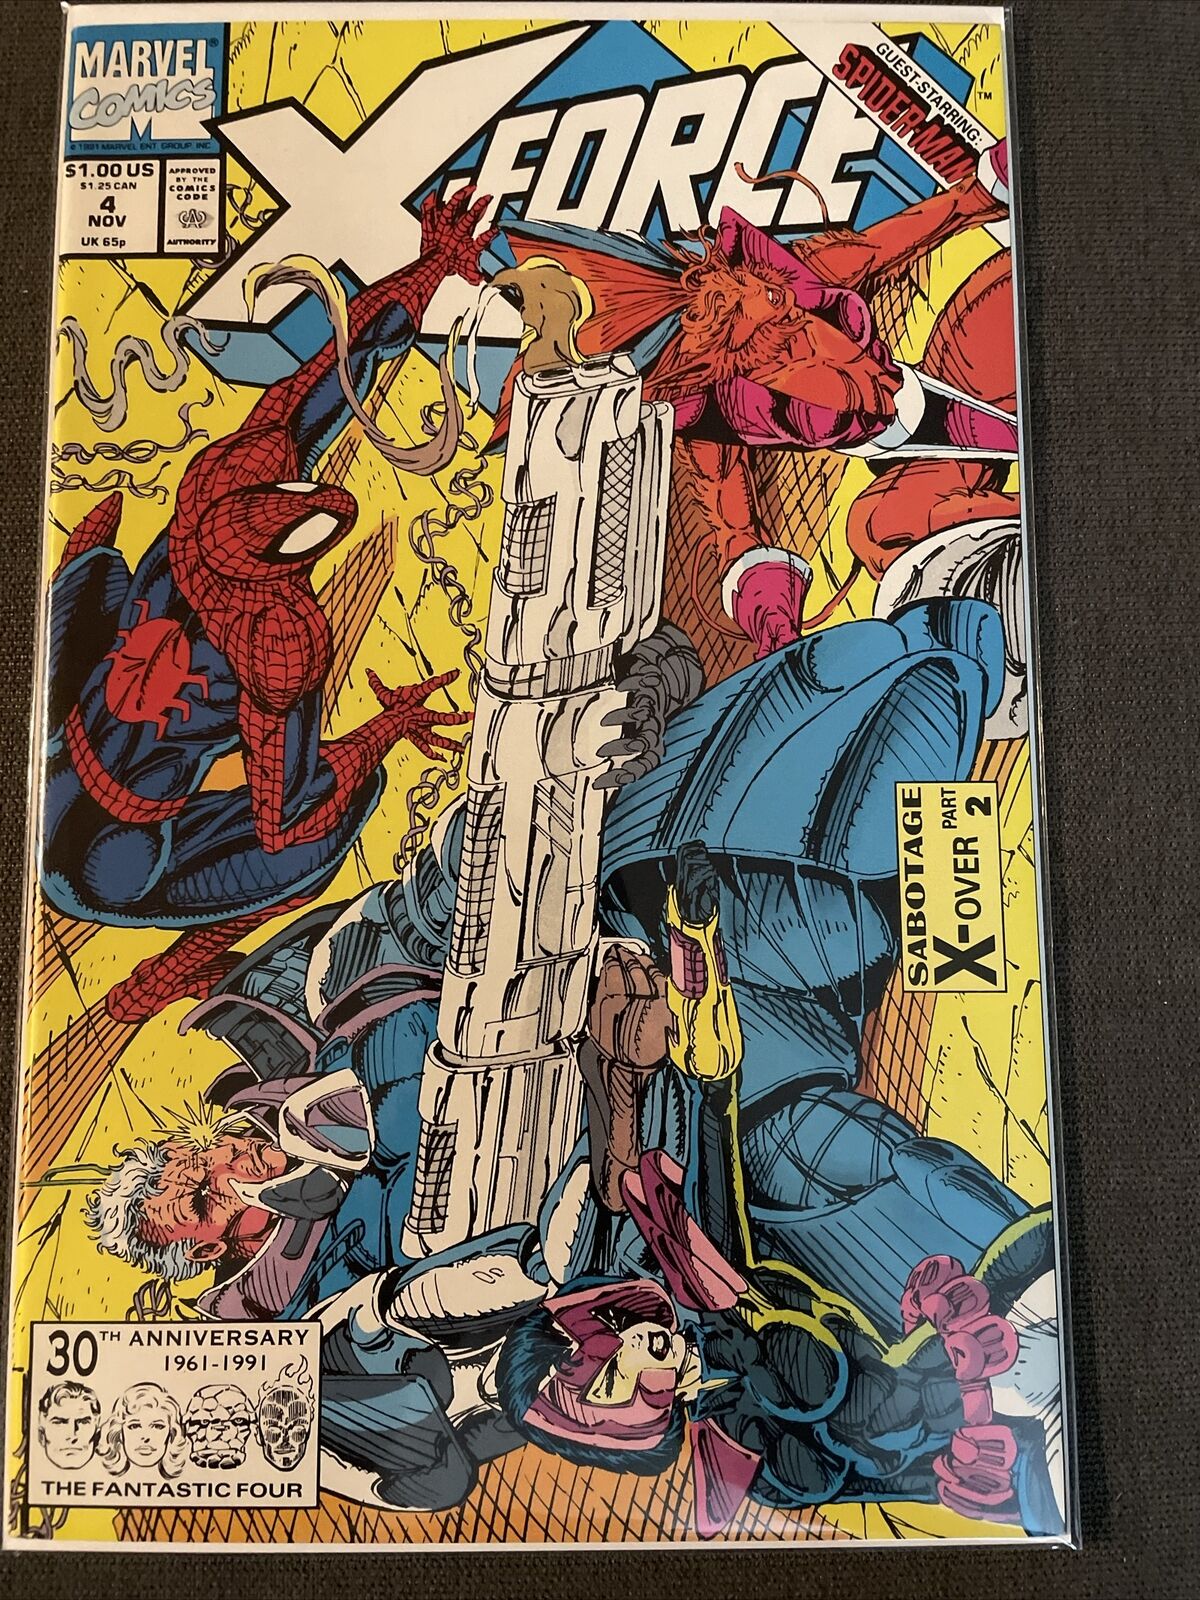 Marvel - X-FORCE #4 (Great Condition) bagged and boarded